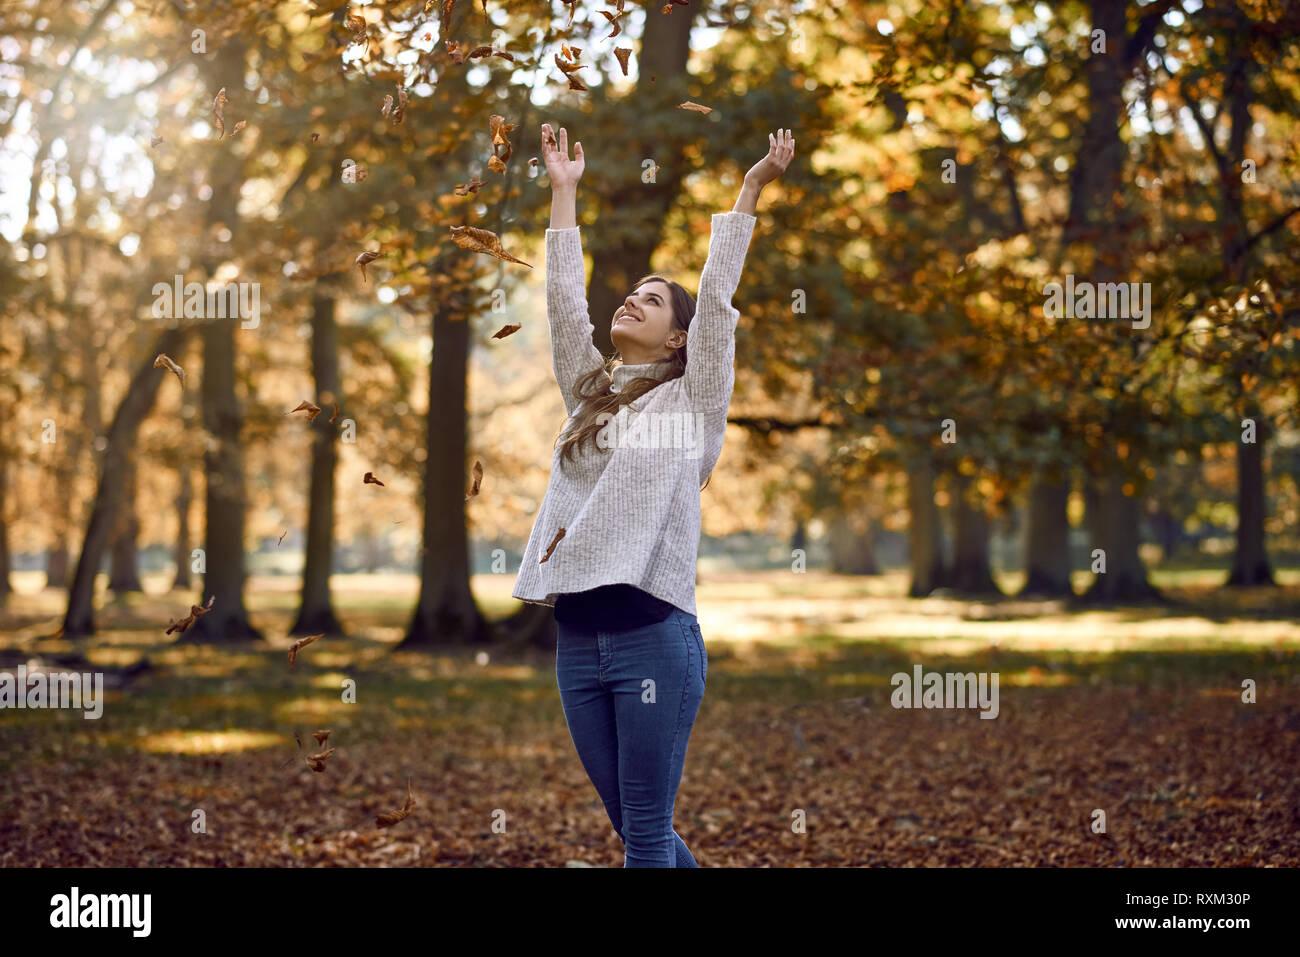 Joyful attractive young woman throwing autumn leaves into the air above her head with a happy smile outdoors in a park with colorful fall foliage on t Stock Photo